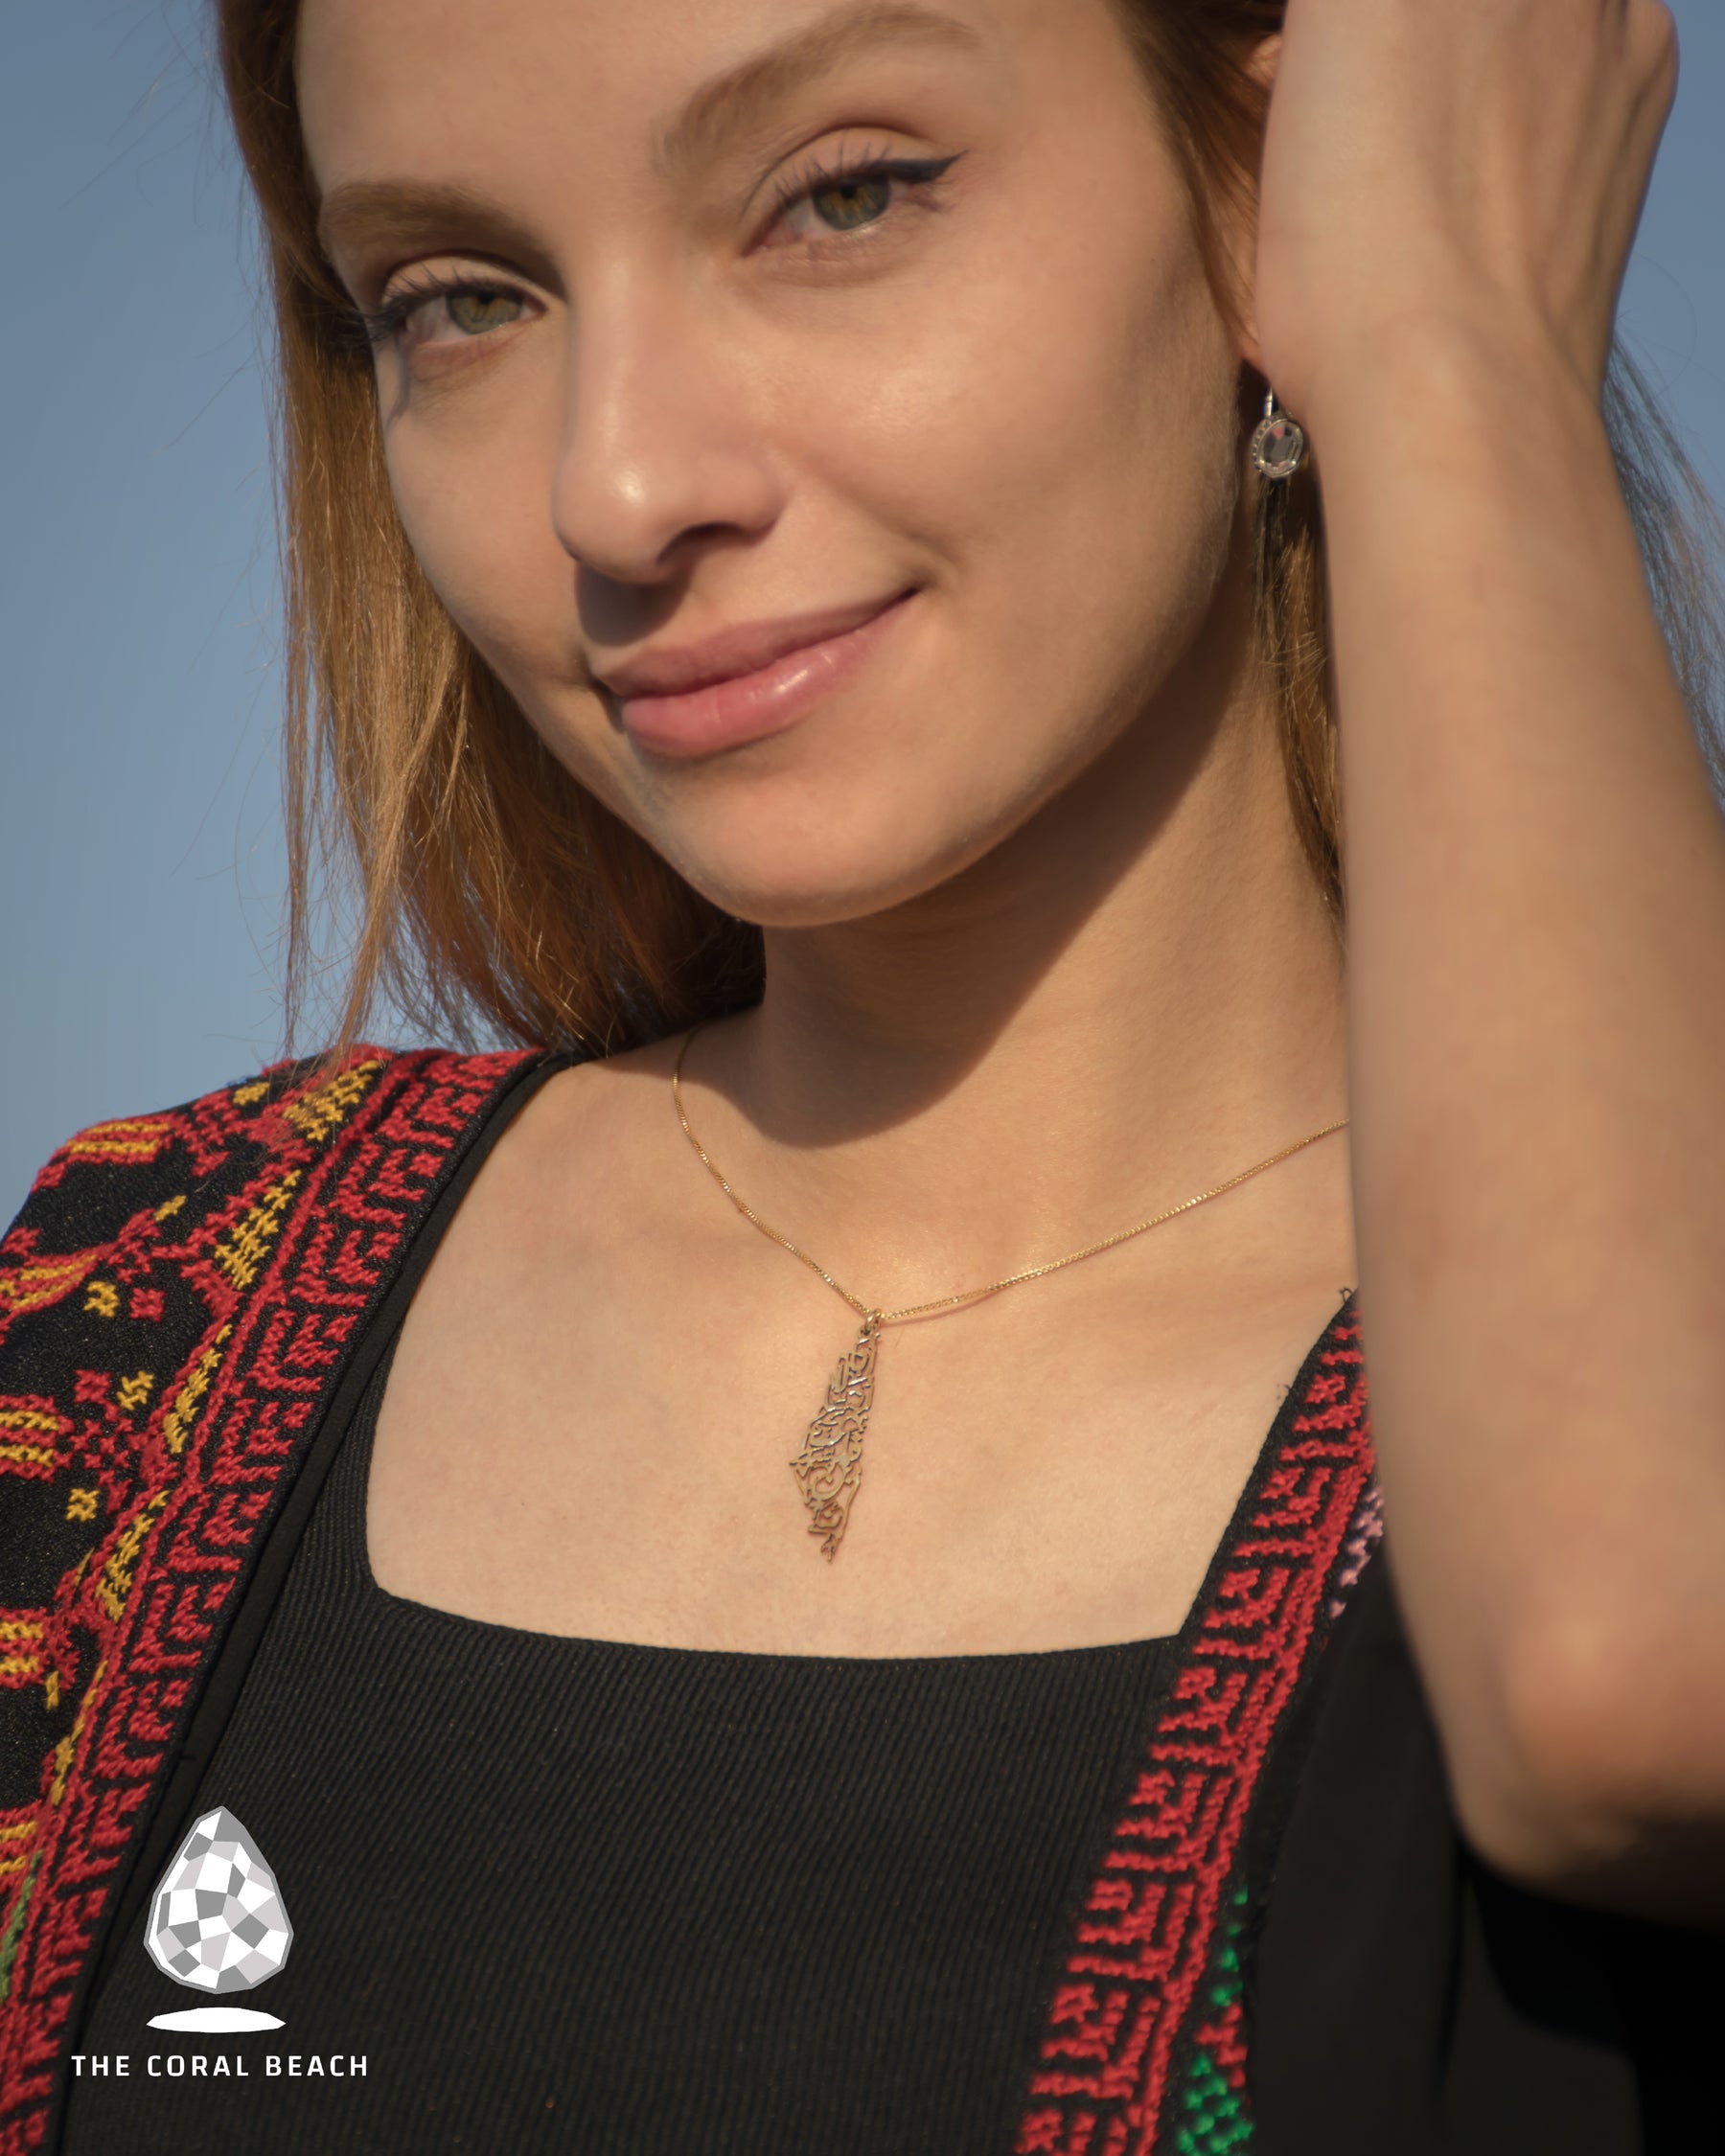 Palestine map with Palestinian famous song written inside necklace